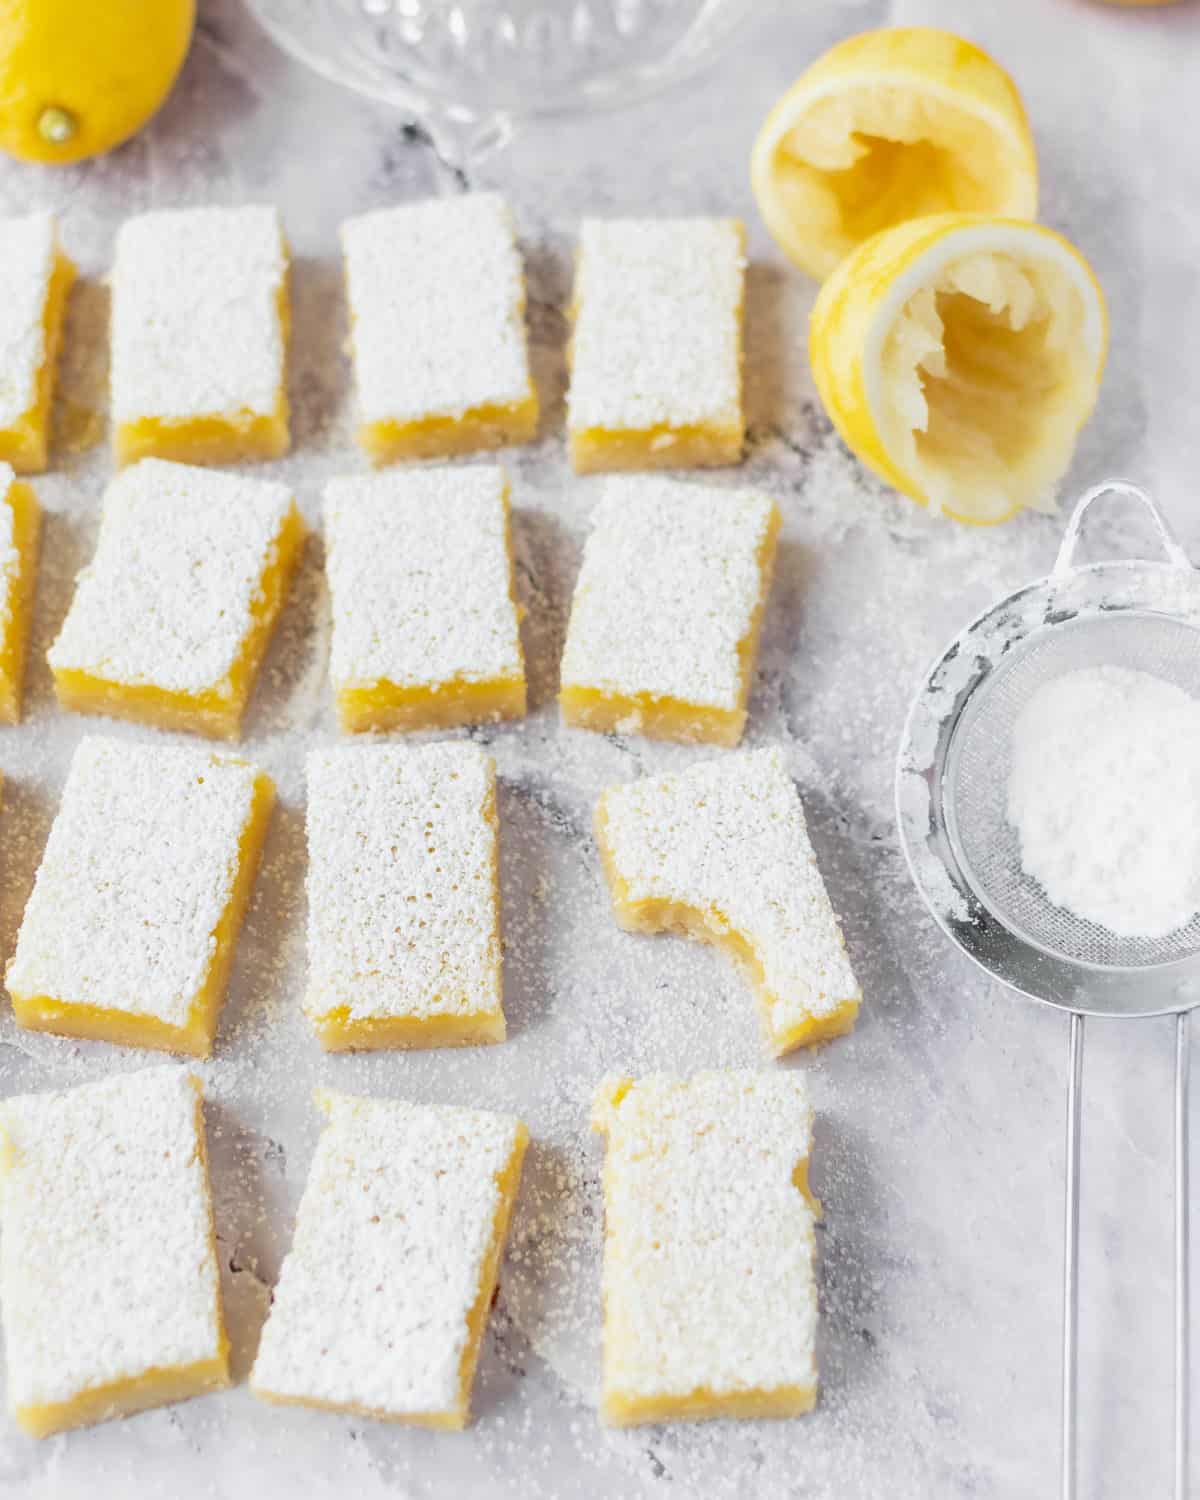 Several lemon bars spread out on a table.